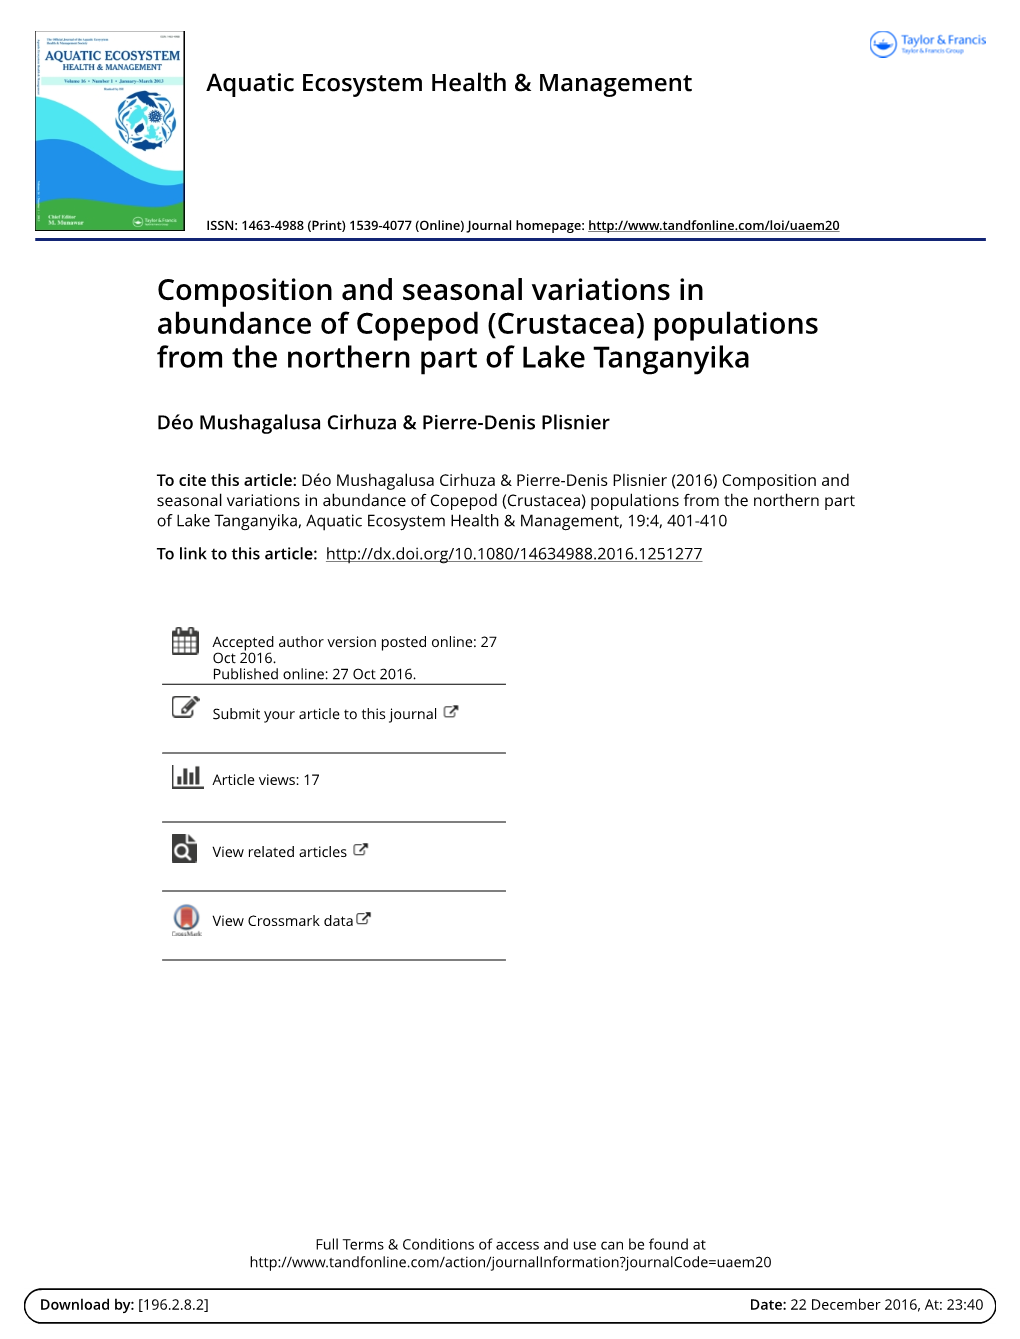 Composition and Seasonal Variations in Abundance of Copepod (Crustacea) Populations from the Northern Part of Lake Tanganyika